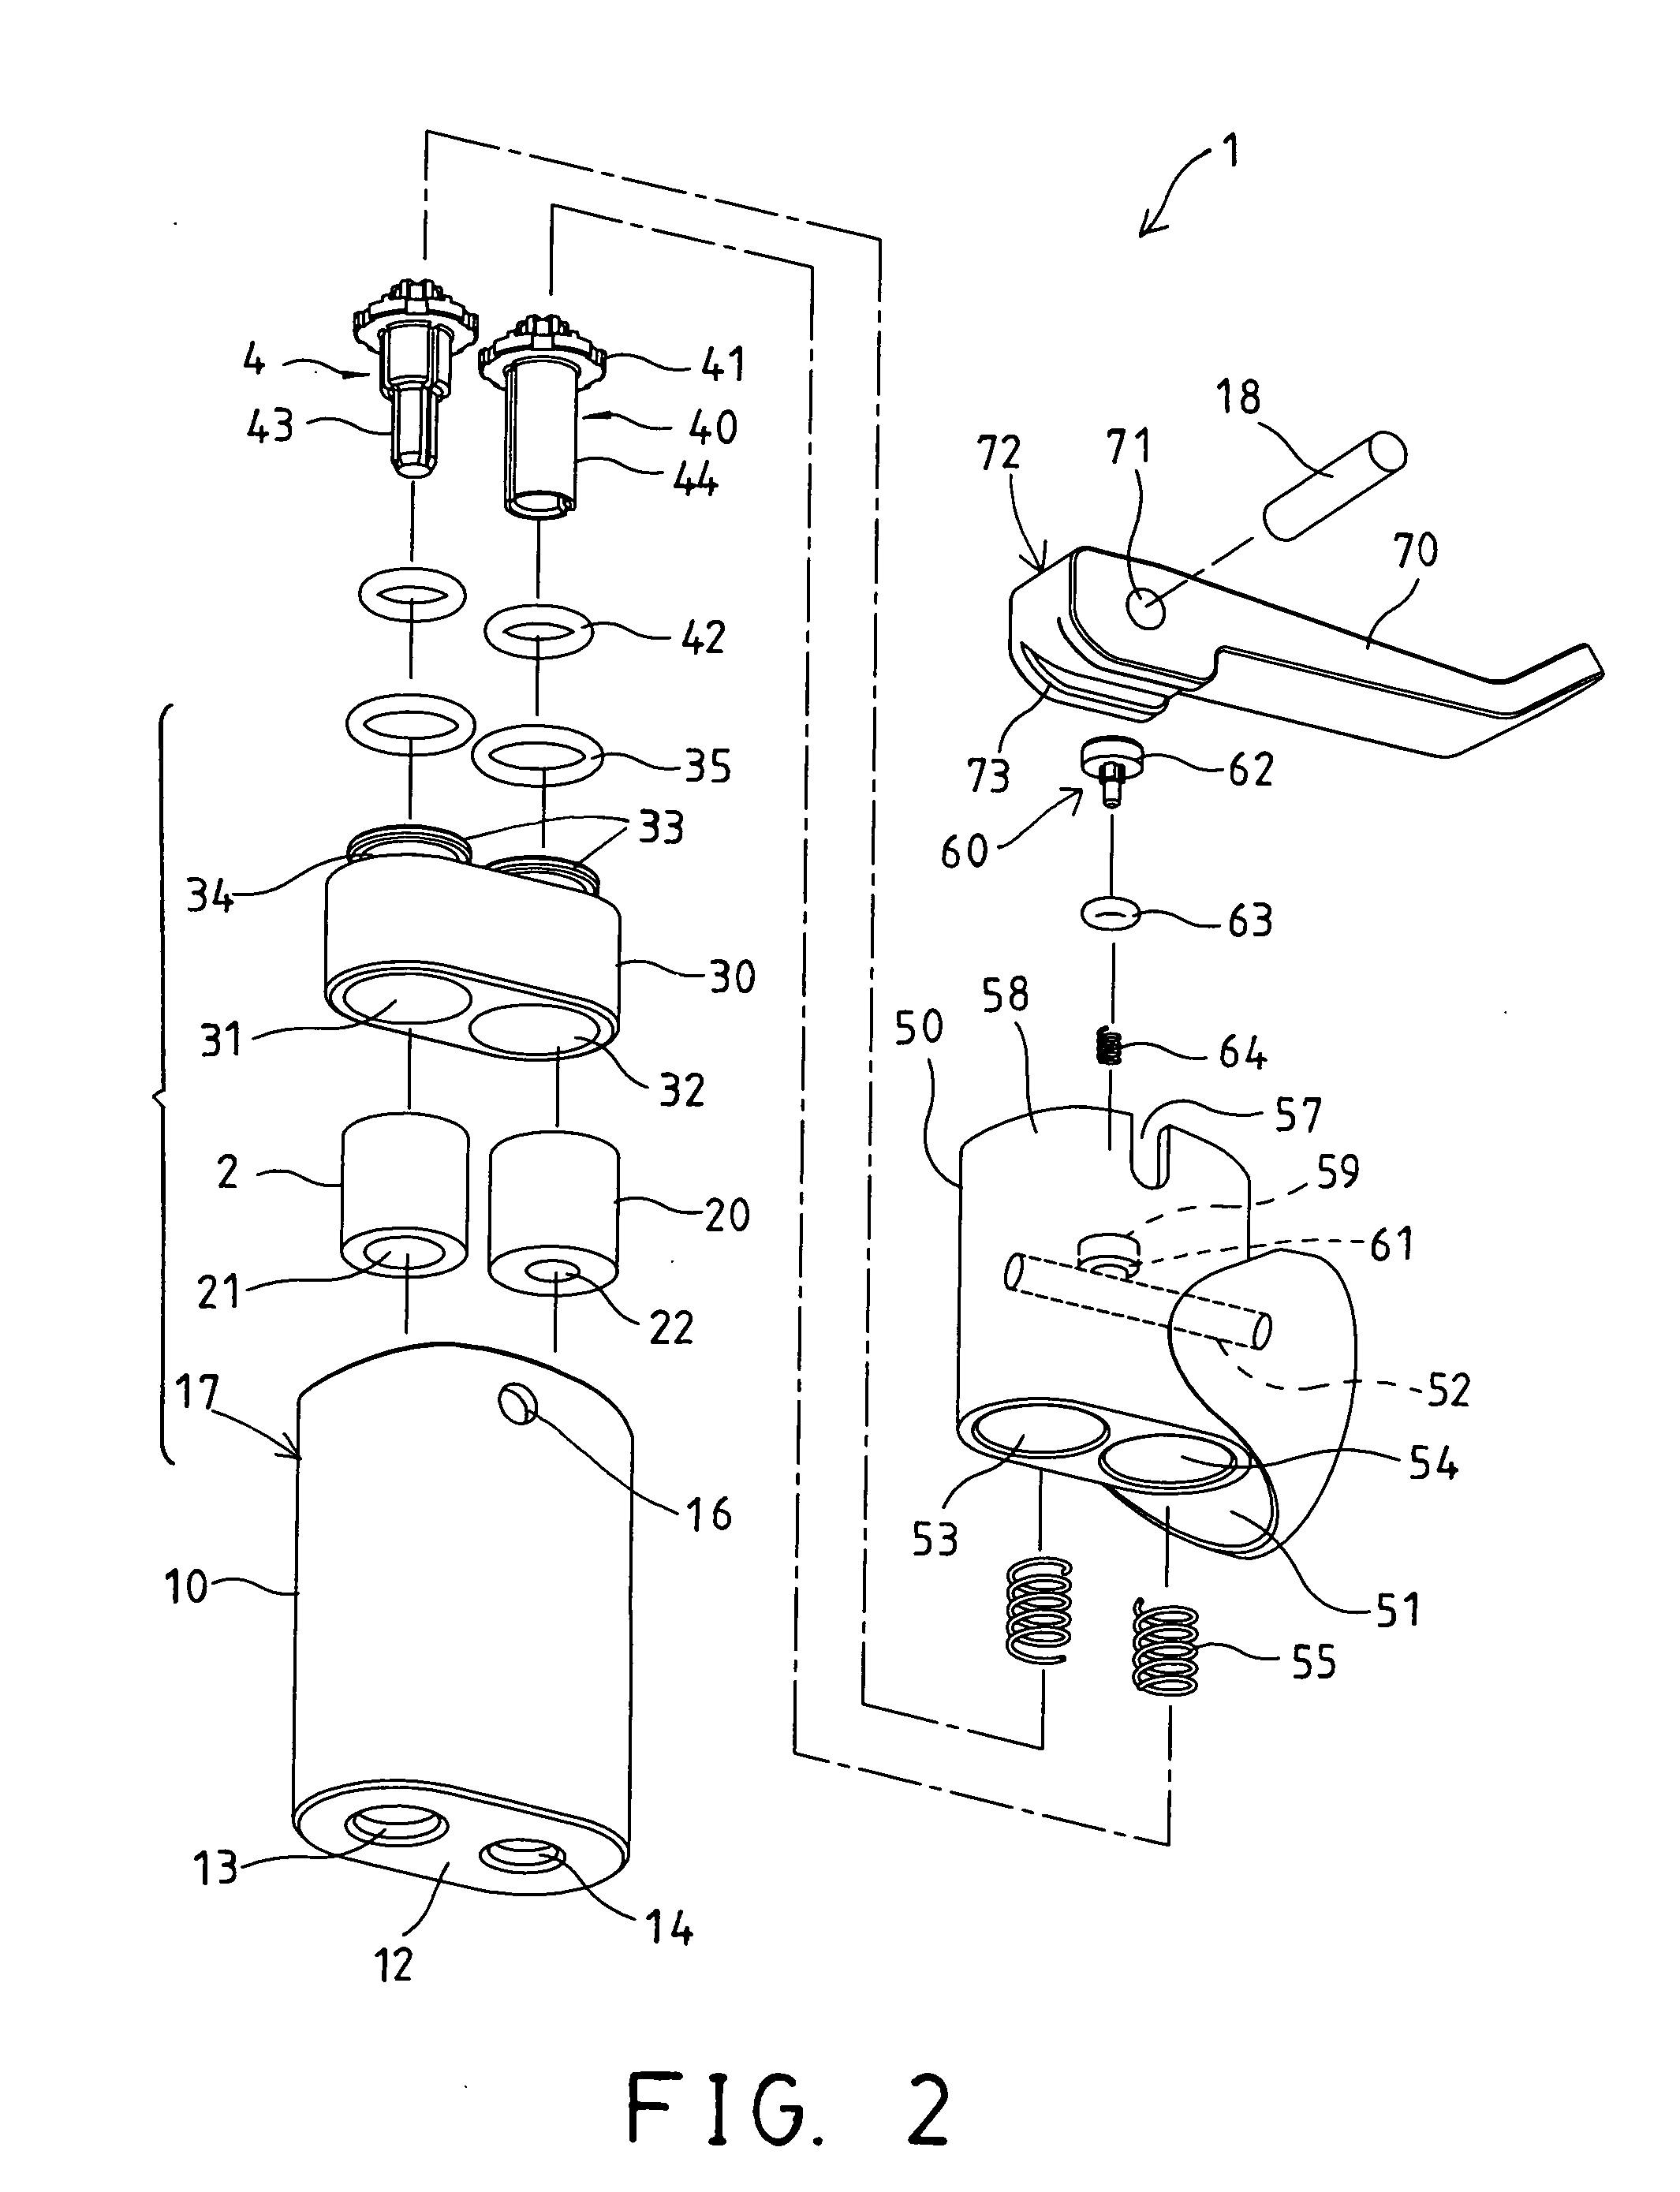 Pump connector device for different valves